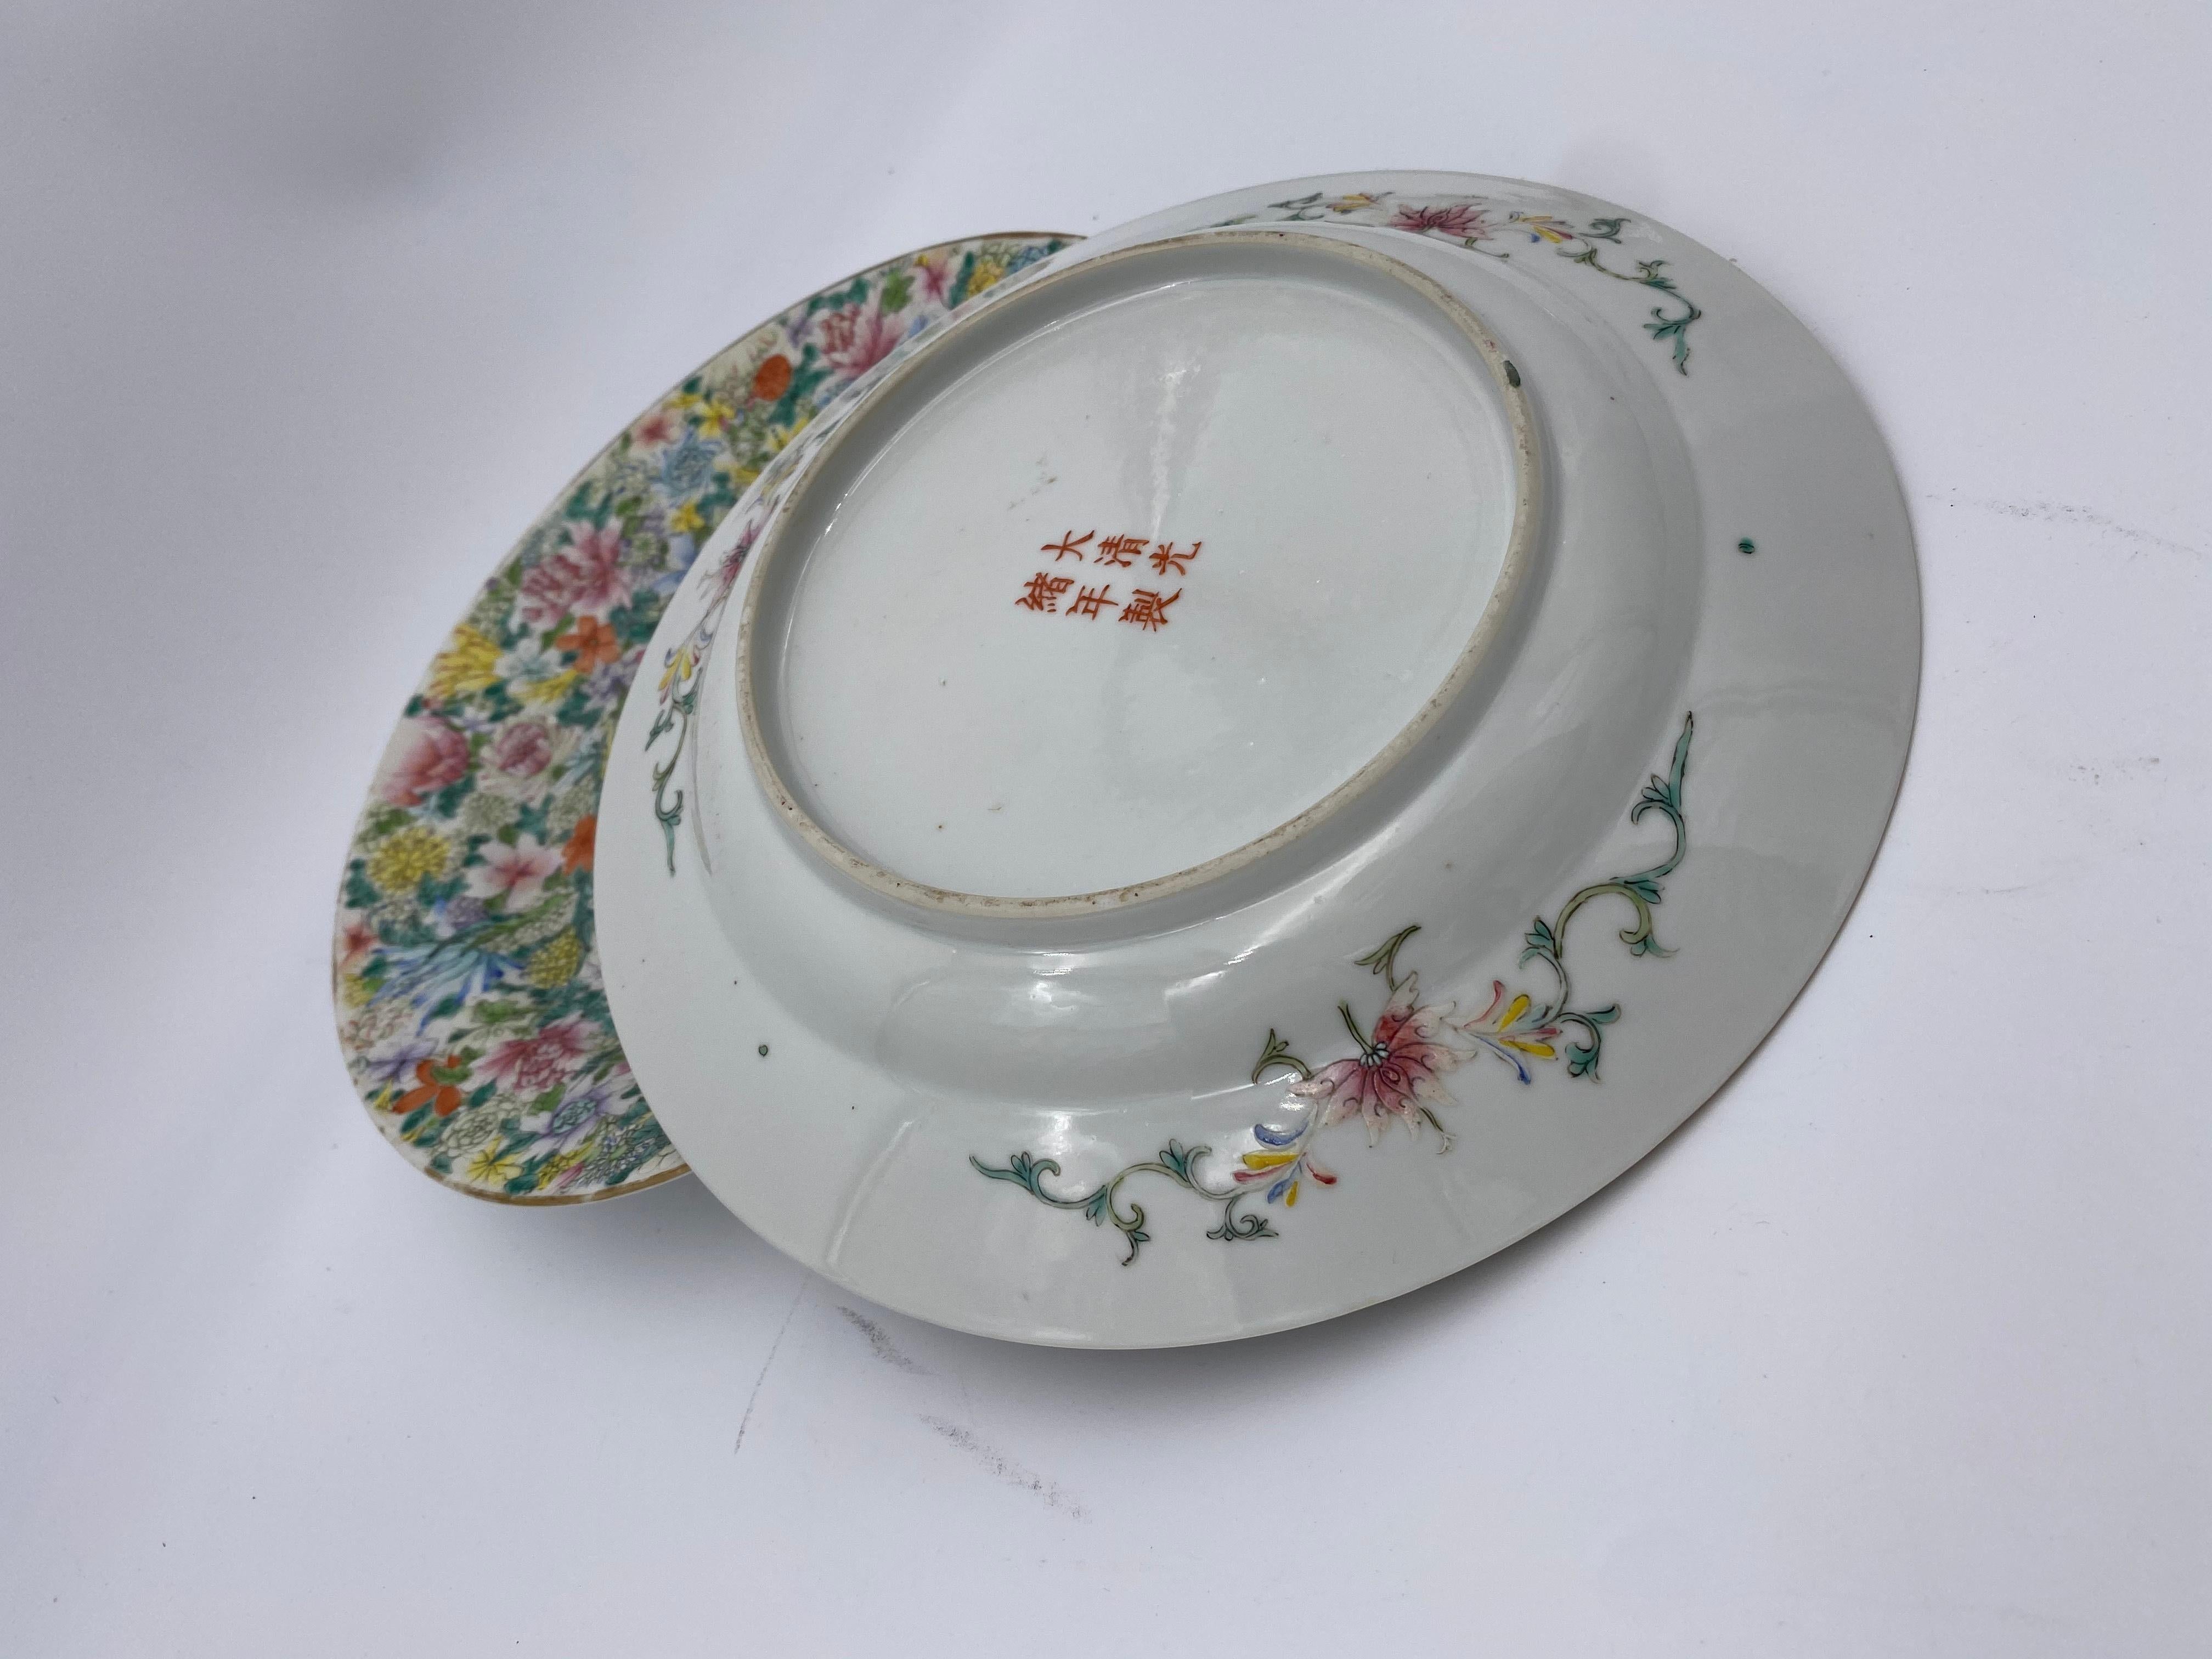 Pair of 19th Century Chinese Flower-Blossom Porcelain Plates For Sale 1